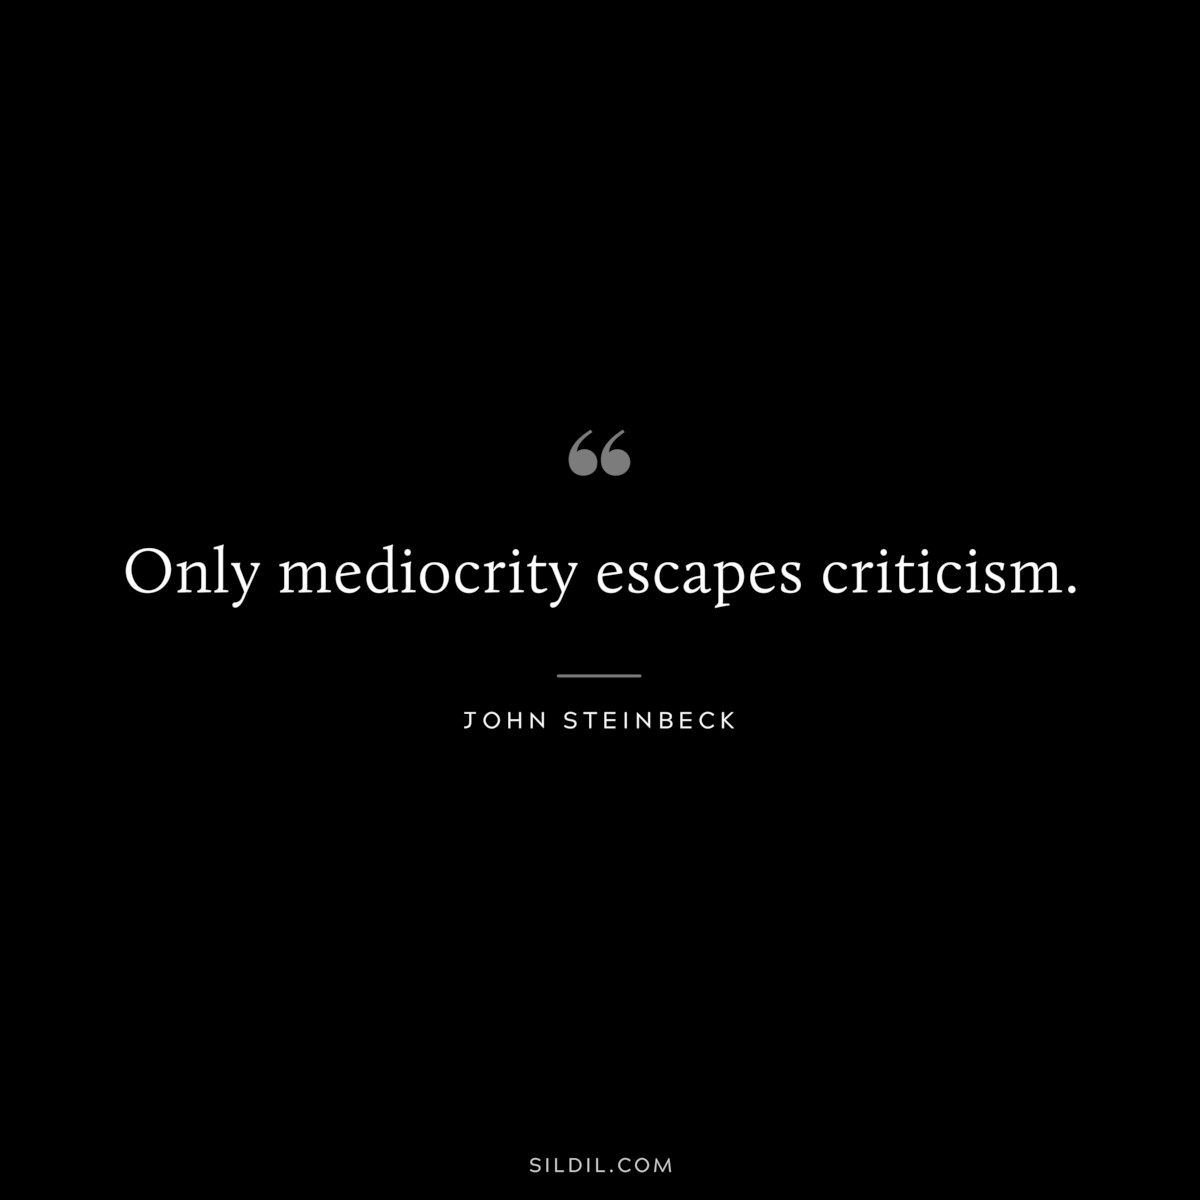 Only mediocrity escapes criticism.― John Steinbeck